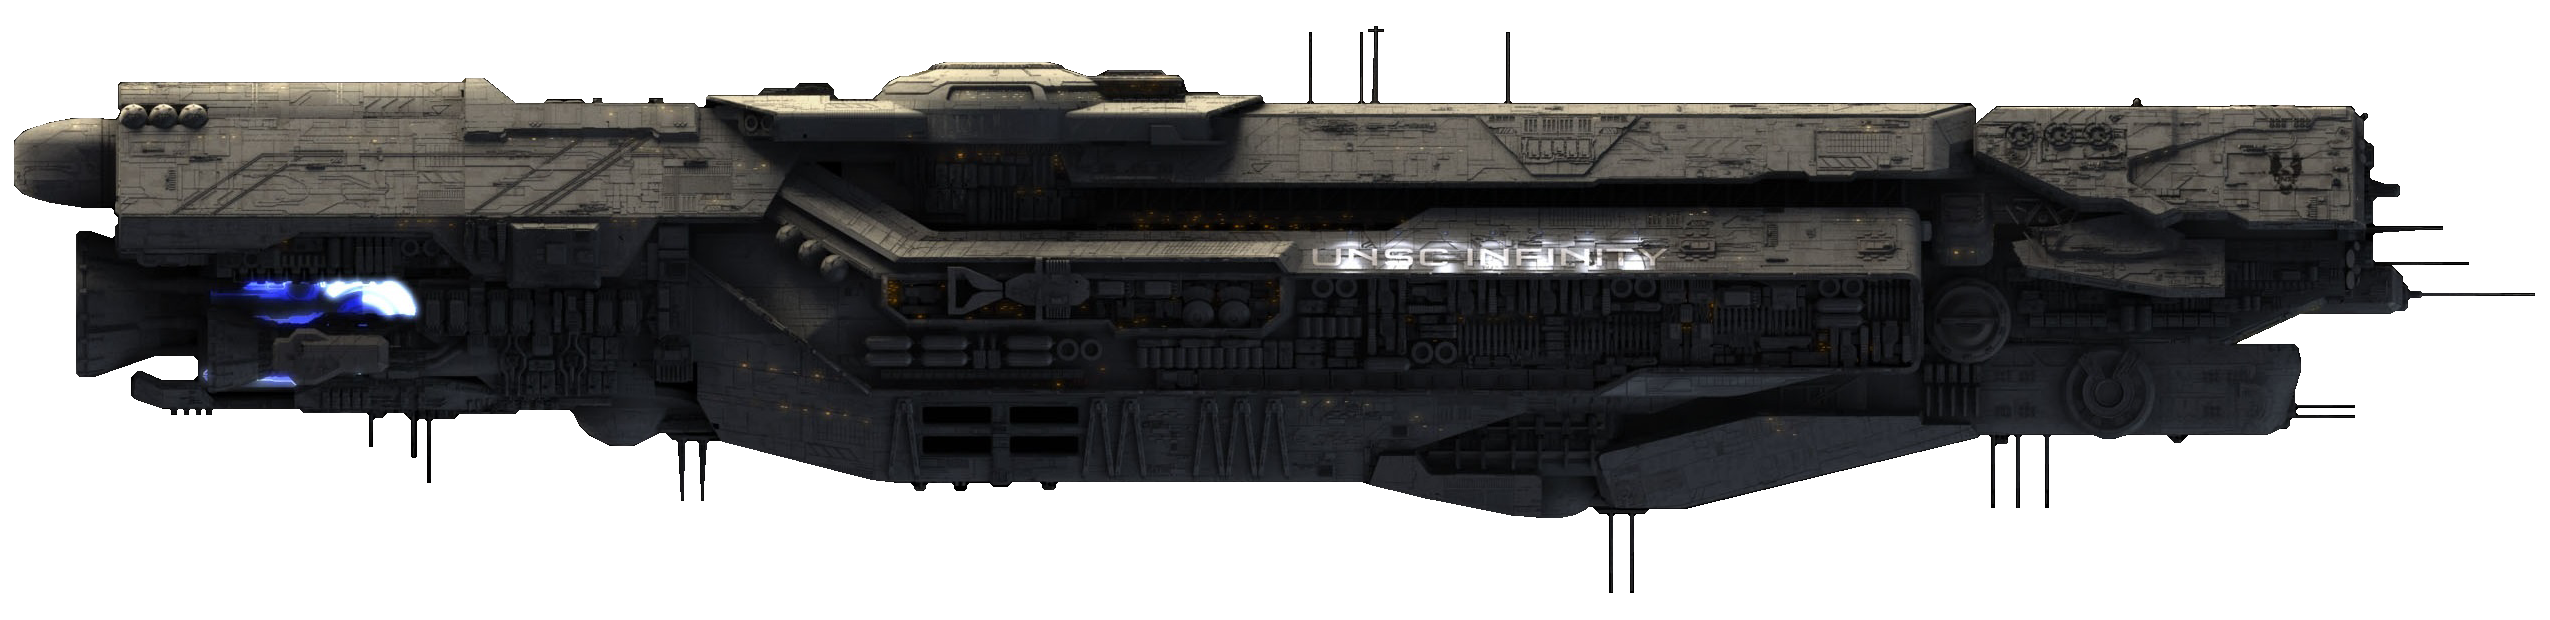 H4-UNSC Infinity (render).png